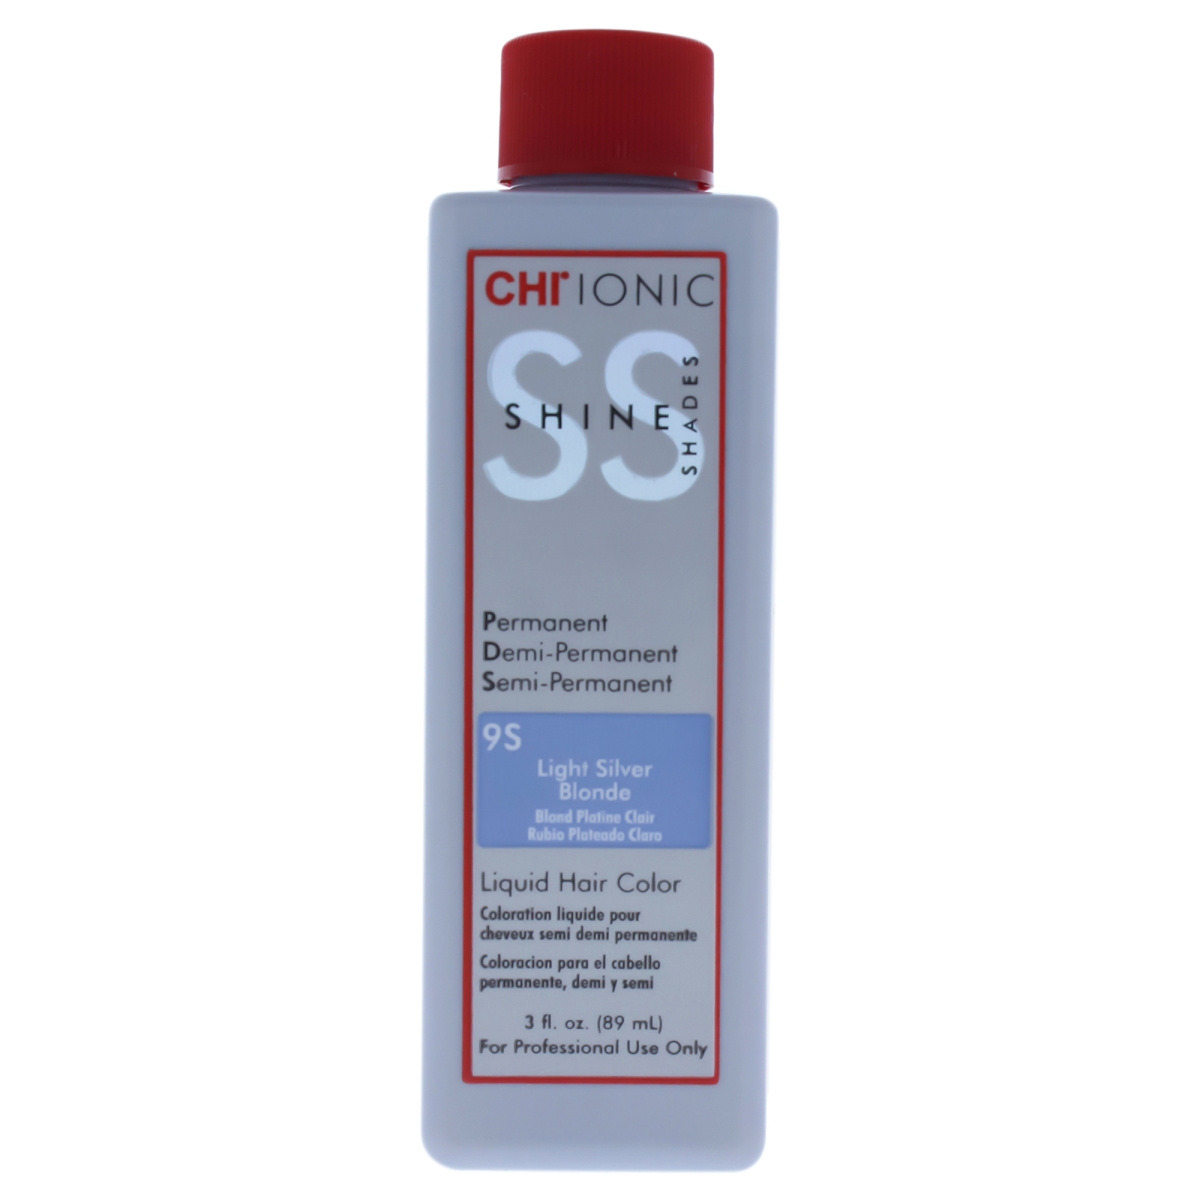 I0084055 Ionic Shine Shades Liquid Hair Color For Unisex - 9s Light Silver Blonde - 3 Oz